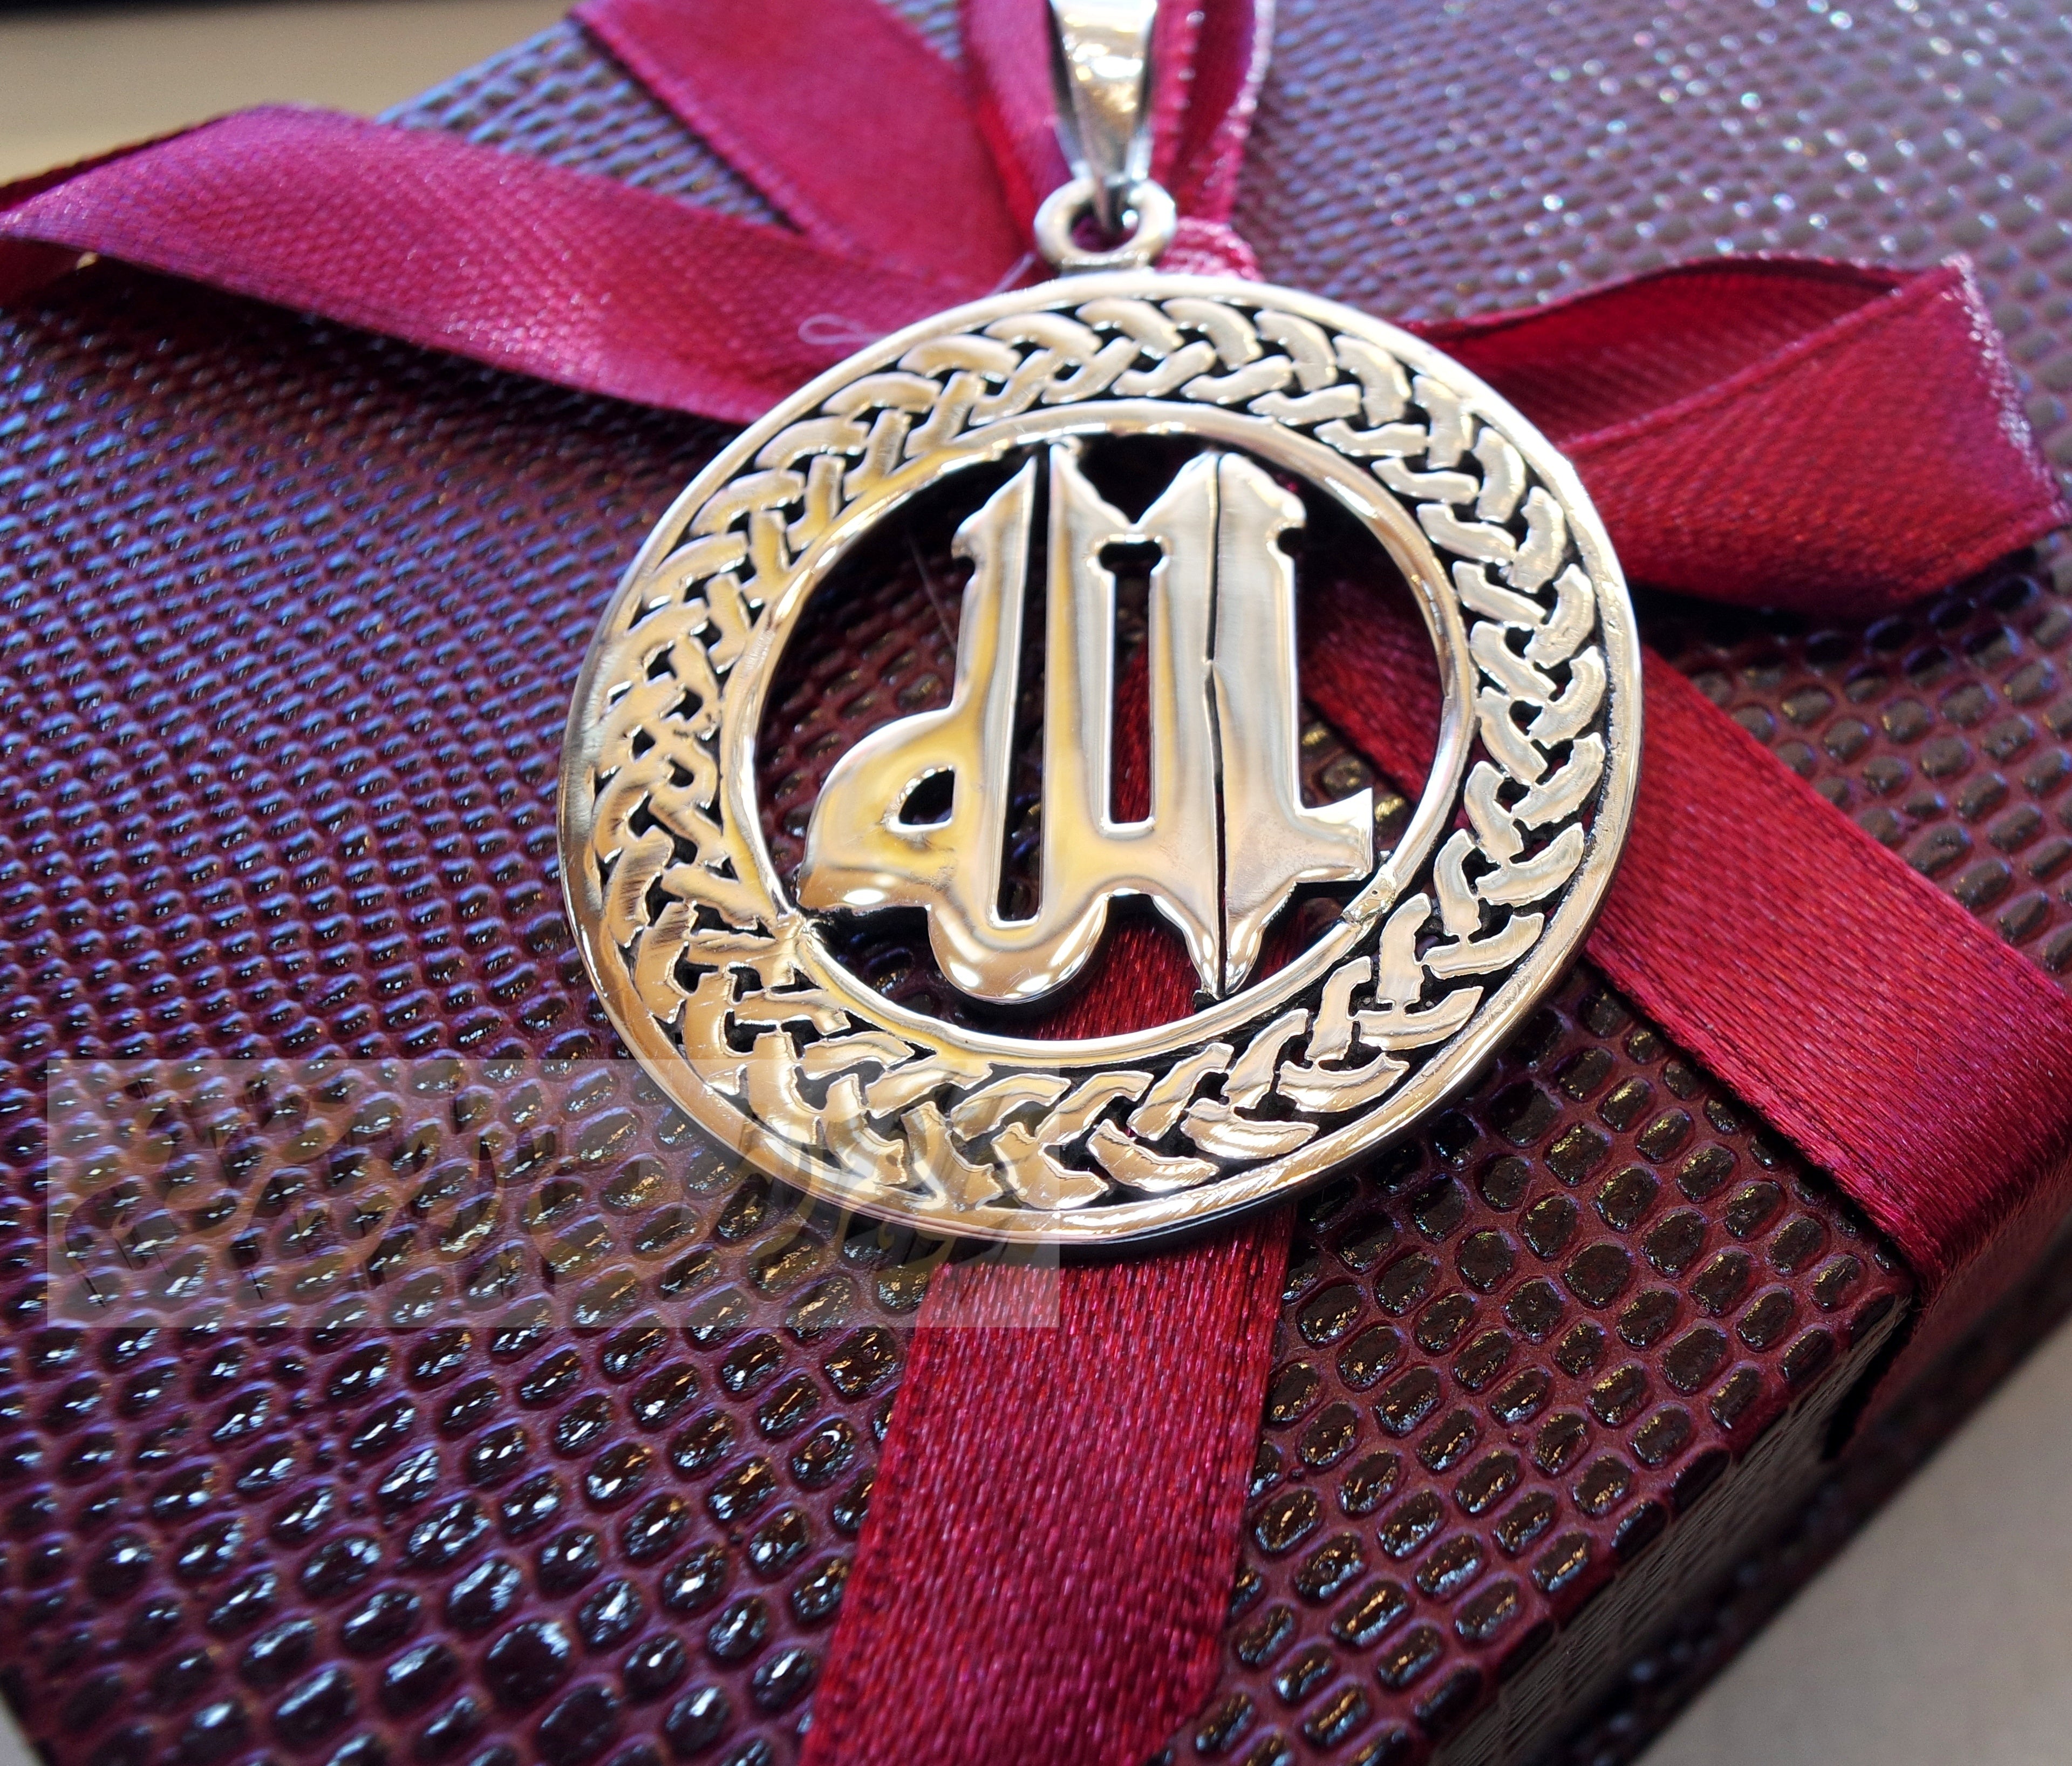 Round Allah pendant sterling silver 925 jewelry Islam vintage handmade heavy express shipping muslim religion